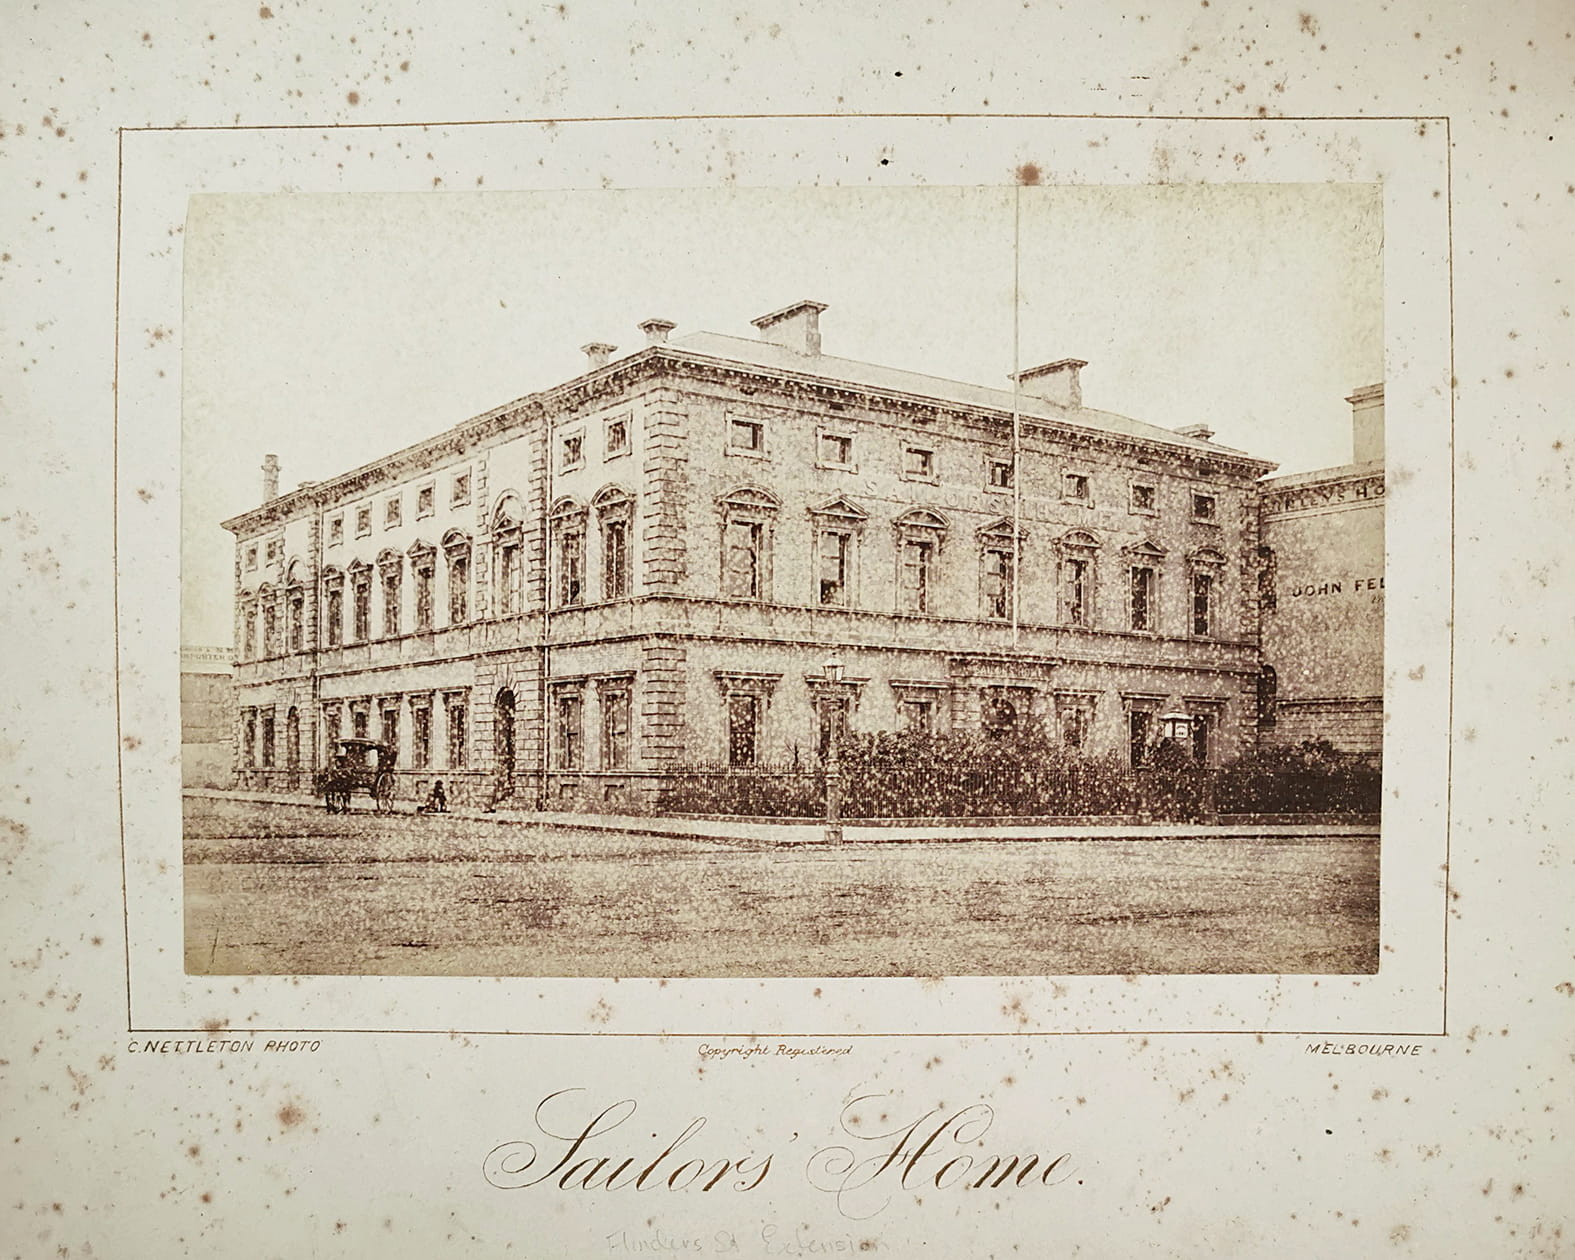 Sailors Home. - Antique Photograph from 1878